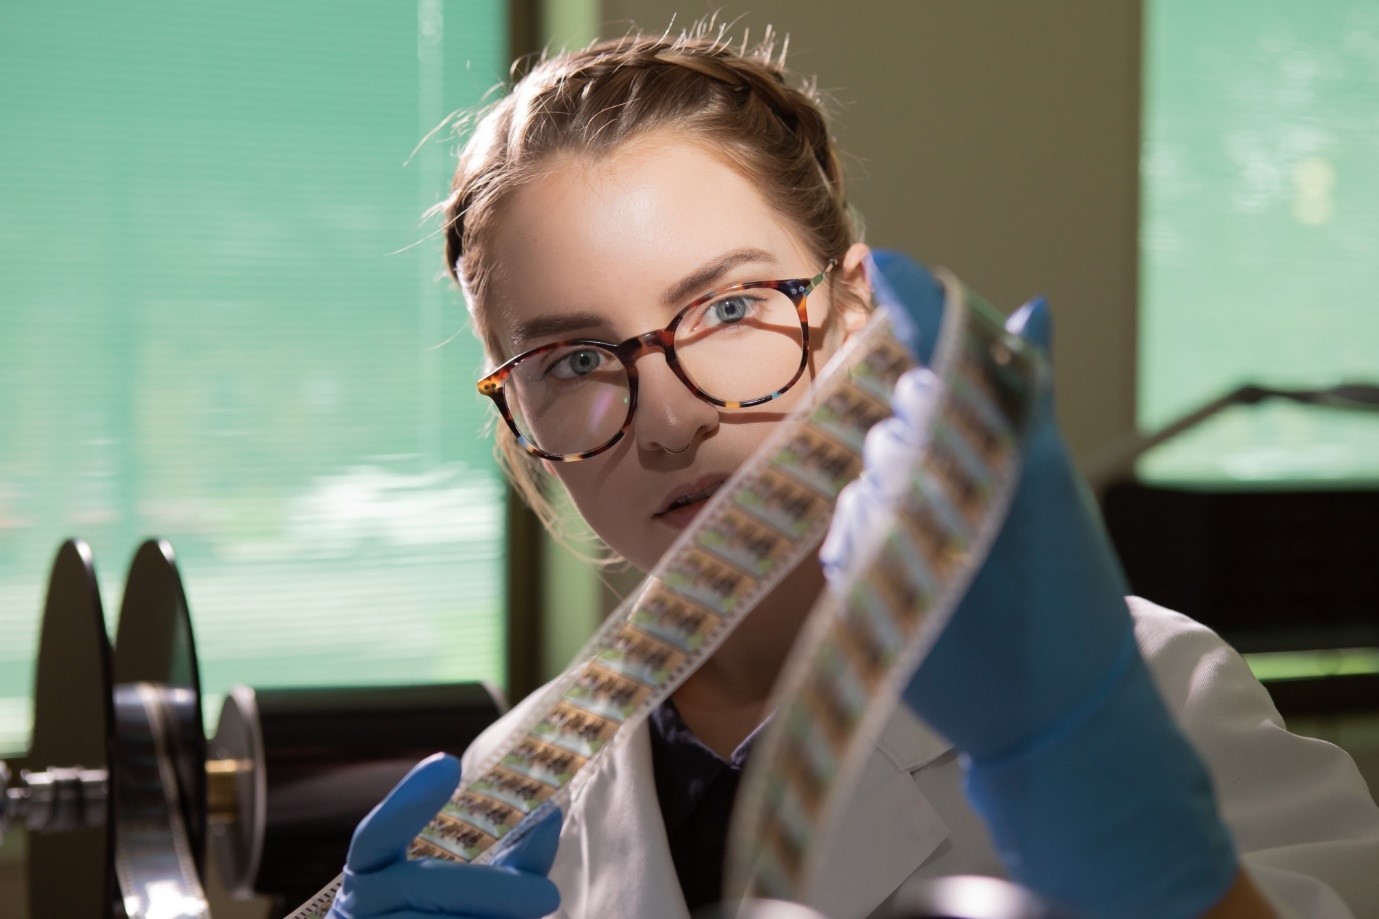 Young woman inspecting a strip of film.